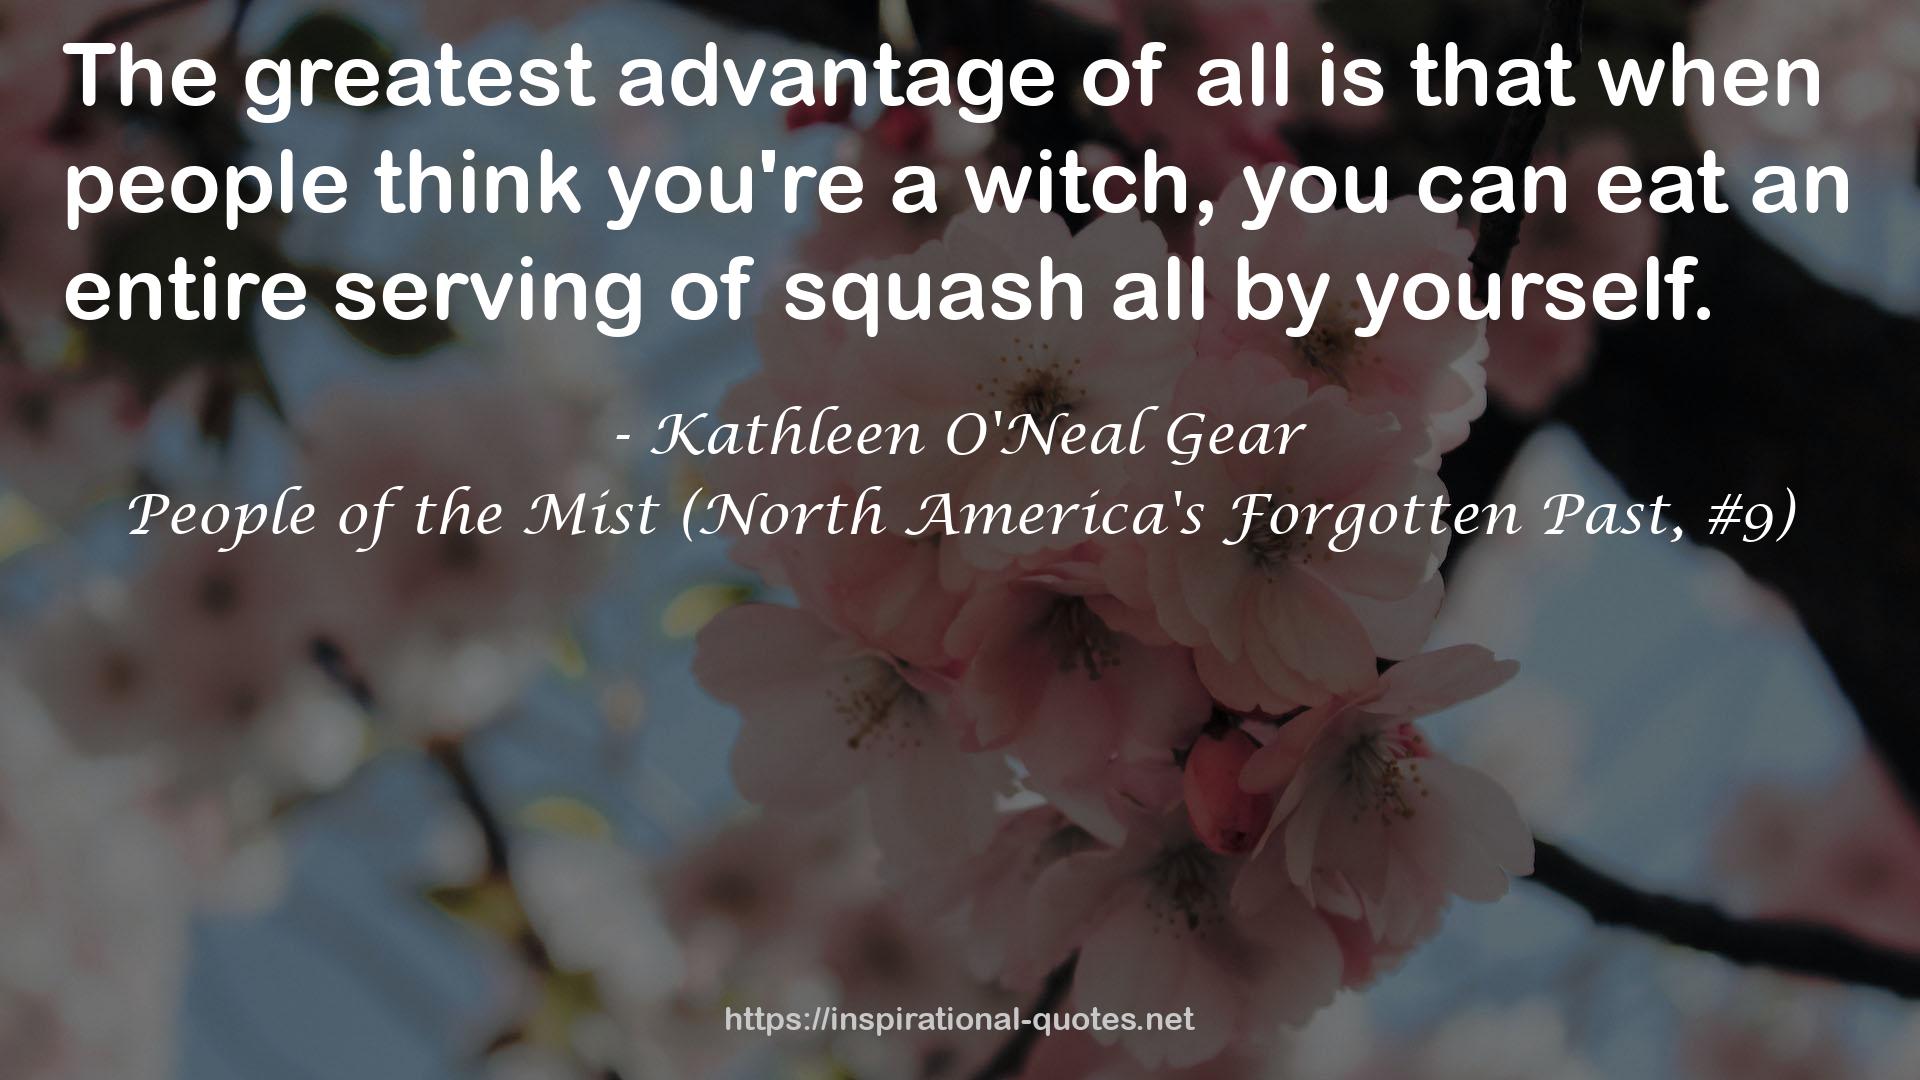 People of the Mist (North America's Forgotten Past, #9) QUOTES